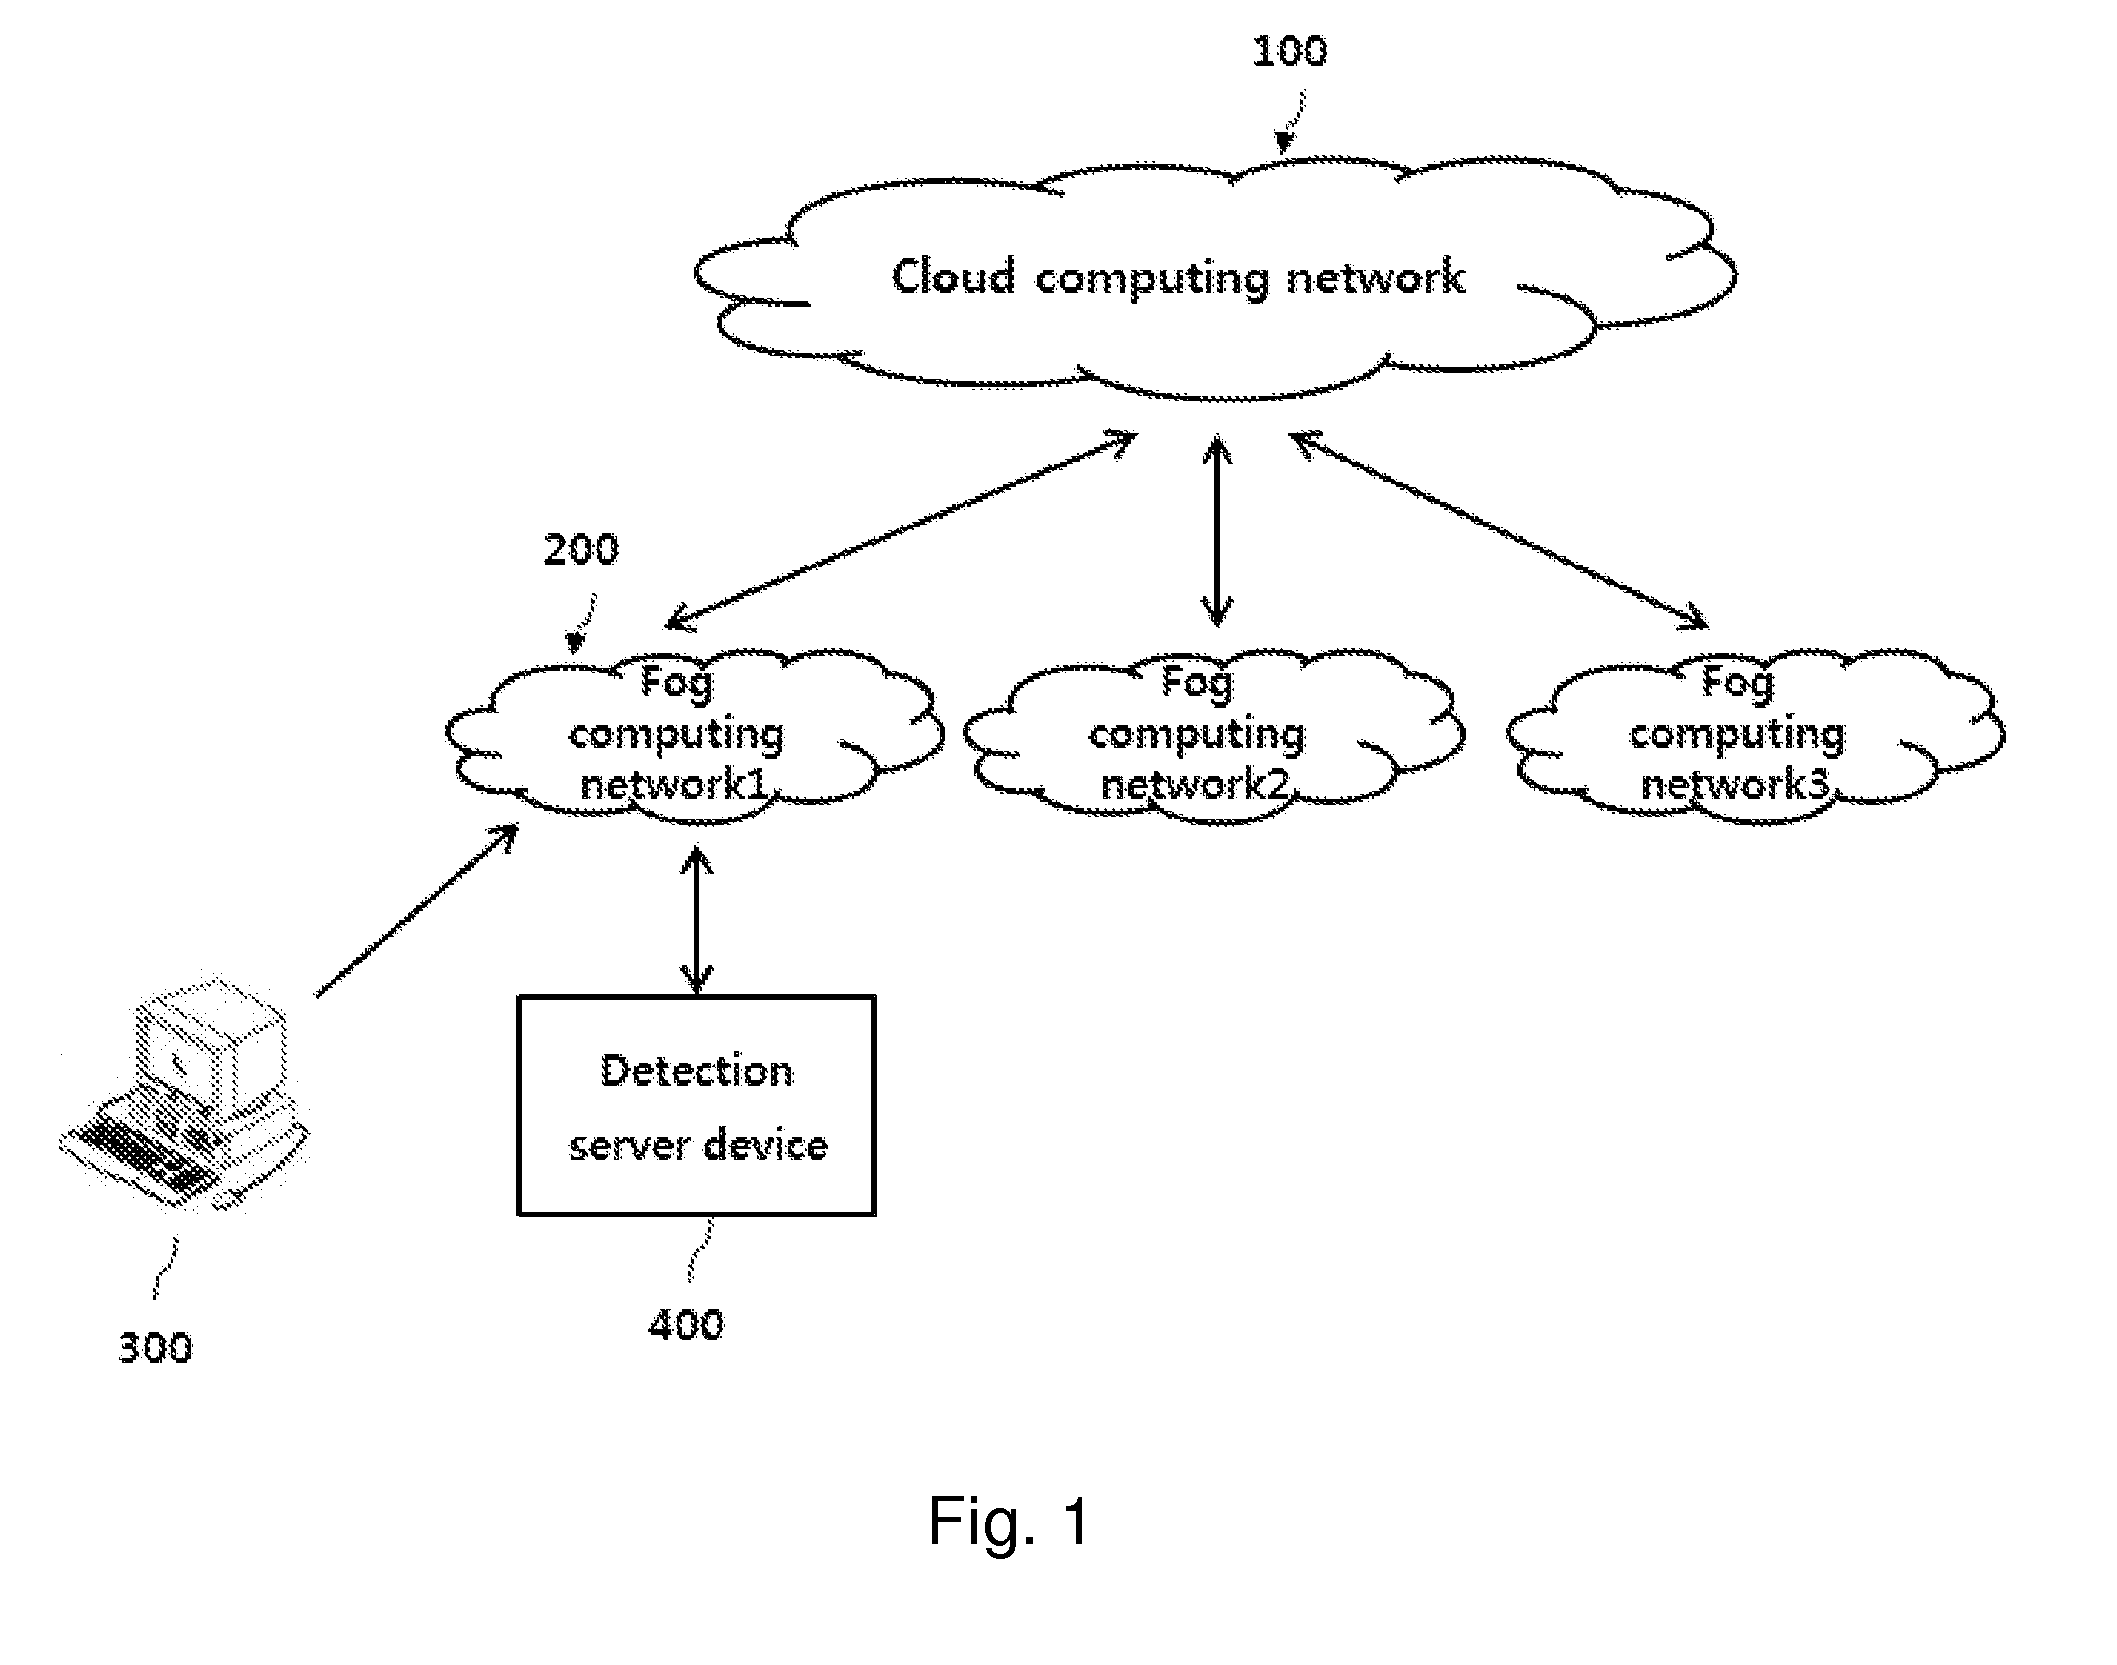 Internet of things network system using fog computing network